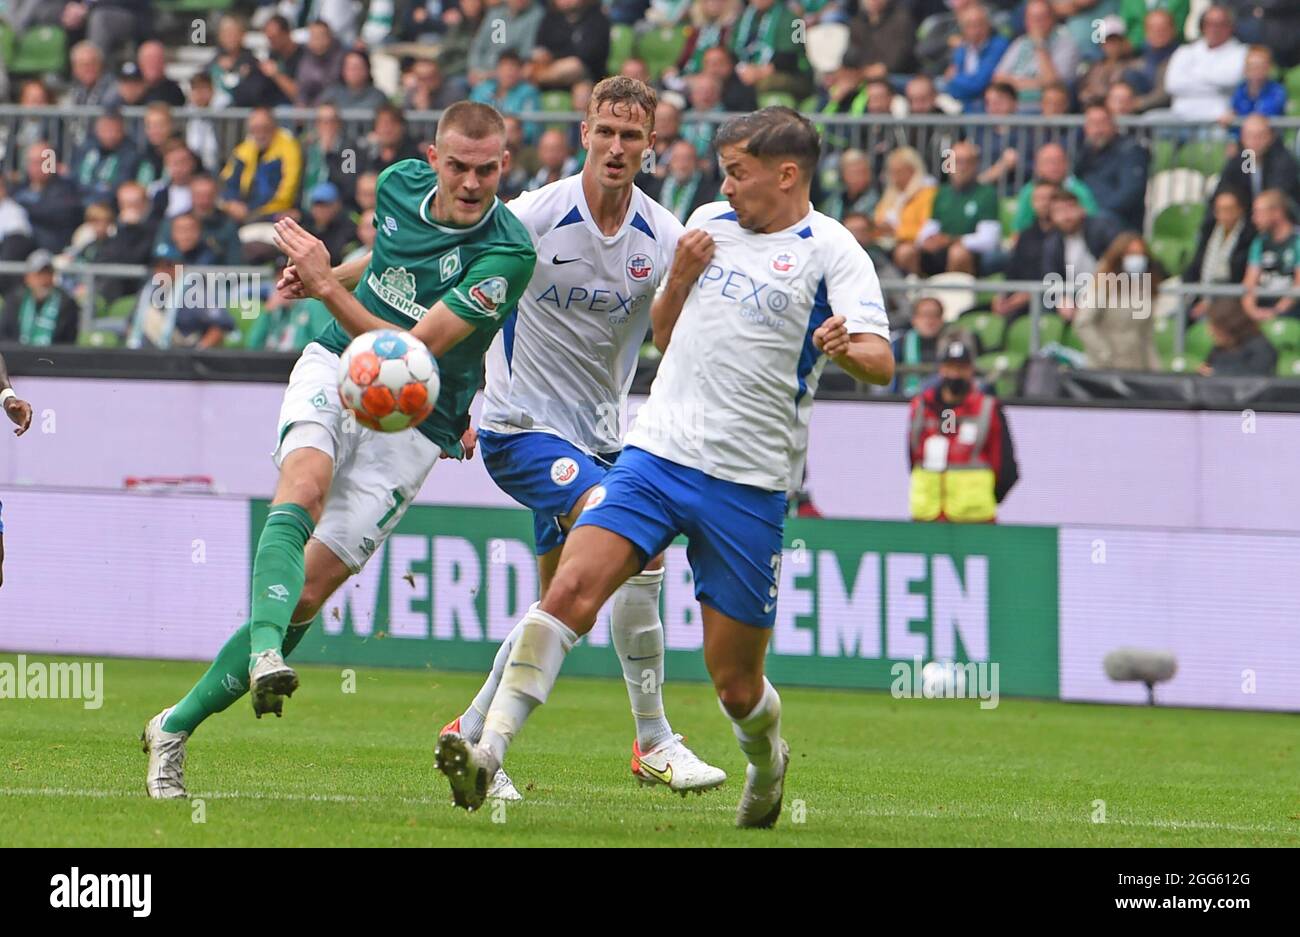 Bremen, Germany. 29th Aug, 2021. Football: 2. Bundesliga, Werder Bremen - Hansa Rostock, Matchday 5. Werder's Marvin Ducksch (l) gets a shot off against Rostock's Julian Riedel and Thomas Meißner. Credit: Carmen Jaspersen/dpa - IMPORTANT NOTE: In accordance with the regulations of the DFL Deutsche Fußball Liga and/or the DFB Deutscher Fußball-Bund, it is prohibited to use or have used photographs taken in the stadium and/or of the match in the form of sequence pictures and/or video-like photo series./dpa/Alamy Live News Stock Photo